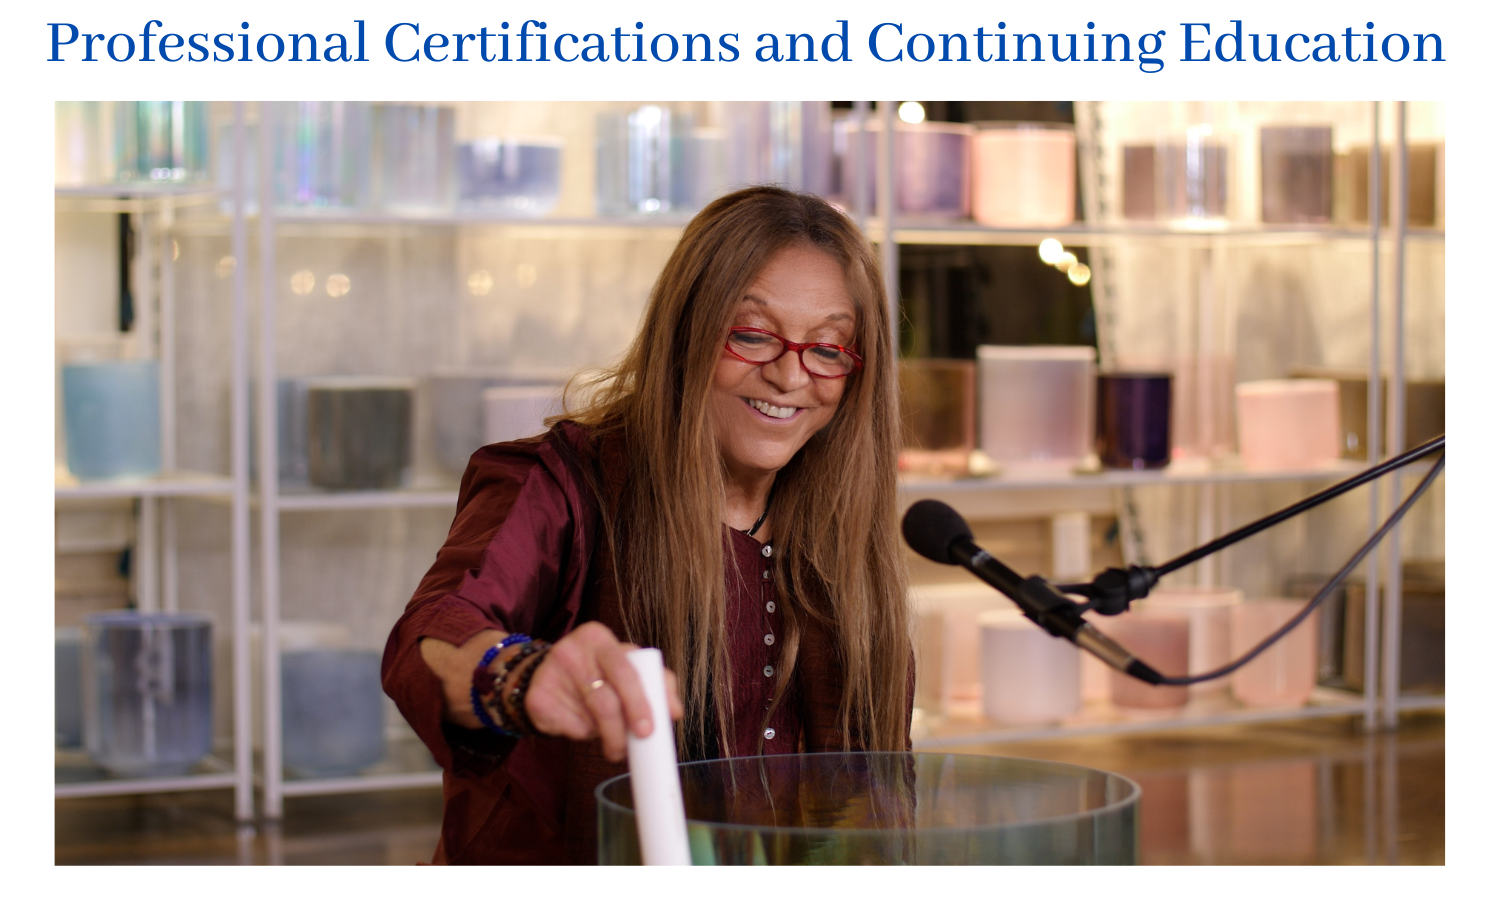 Professional Certifications and Continuing Education